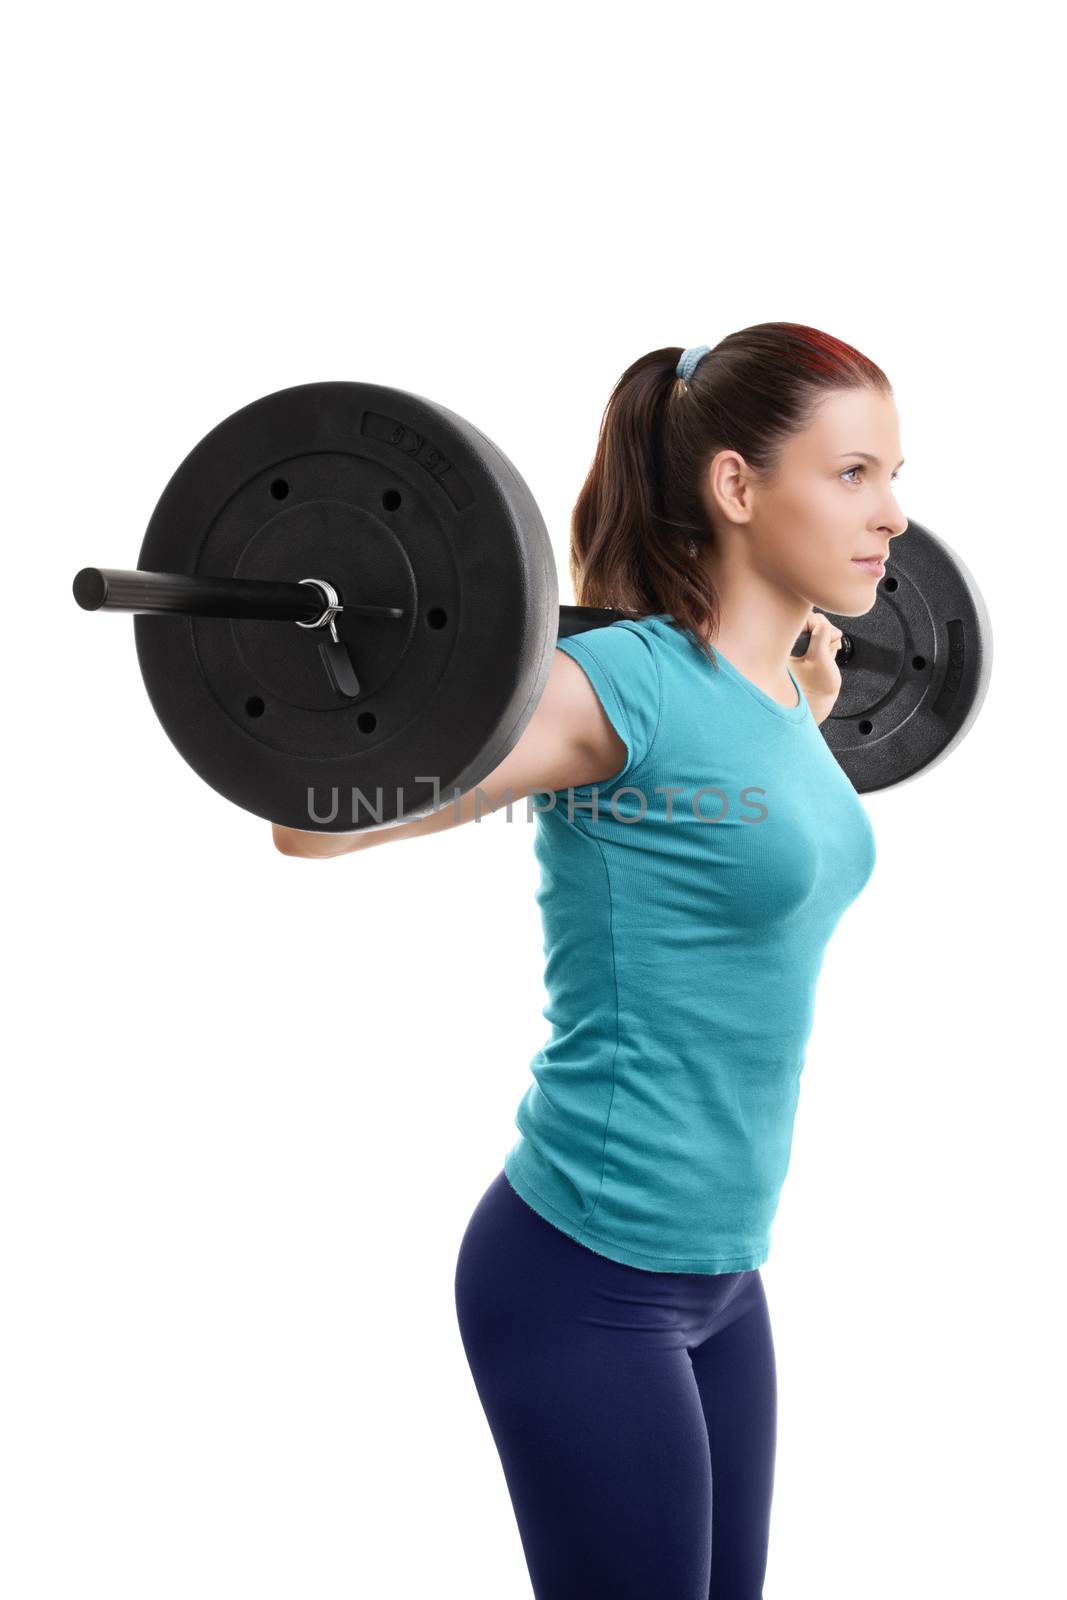 Beautiful fit young girl with barbell on her shoulders getting ready to do squats, isolated on white background.

